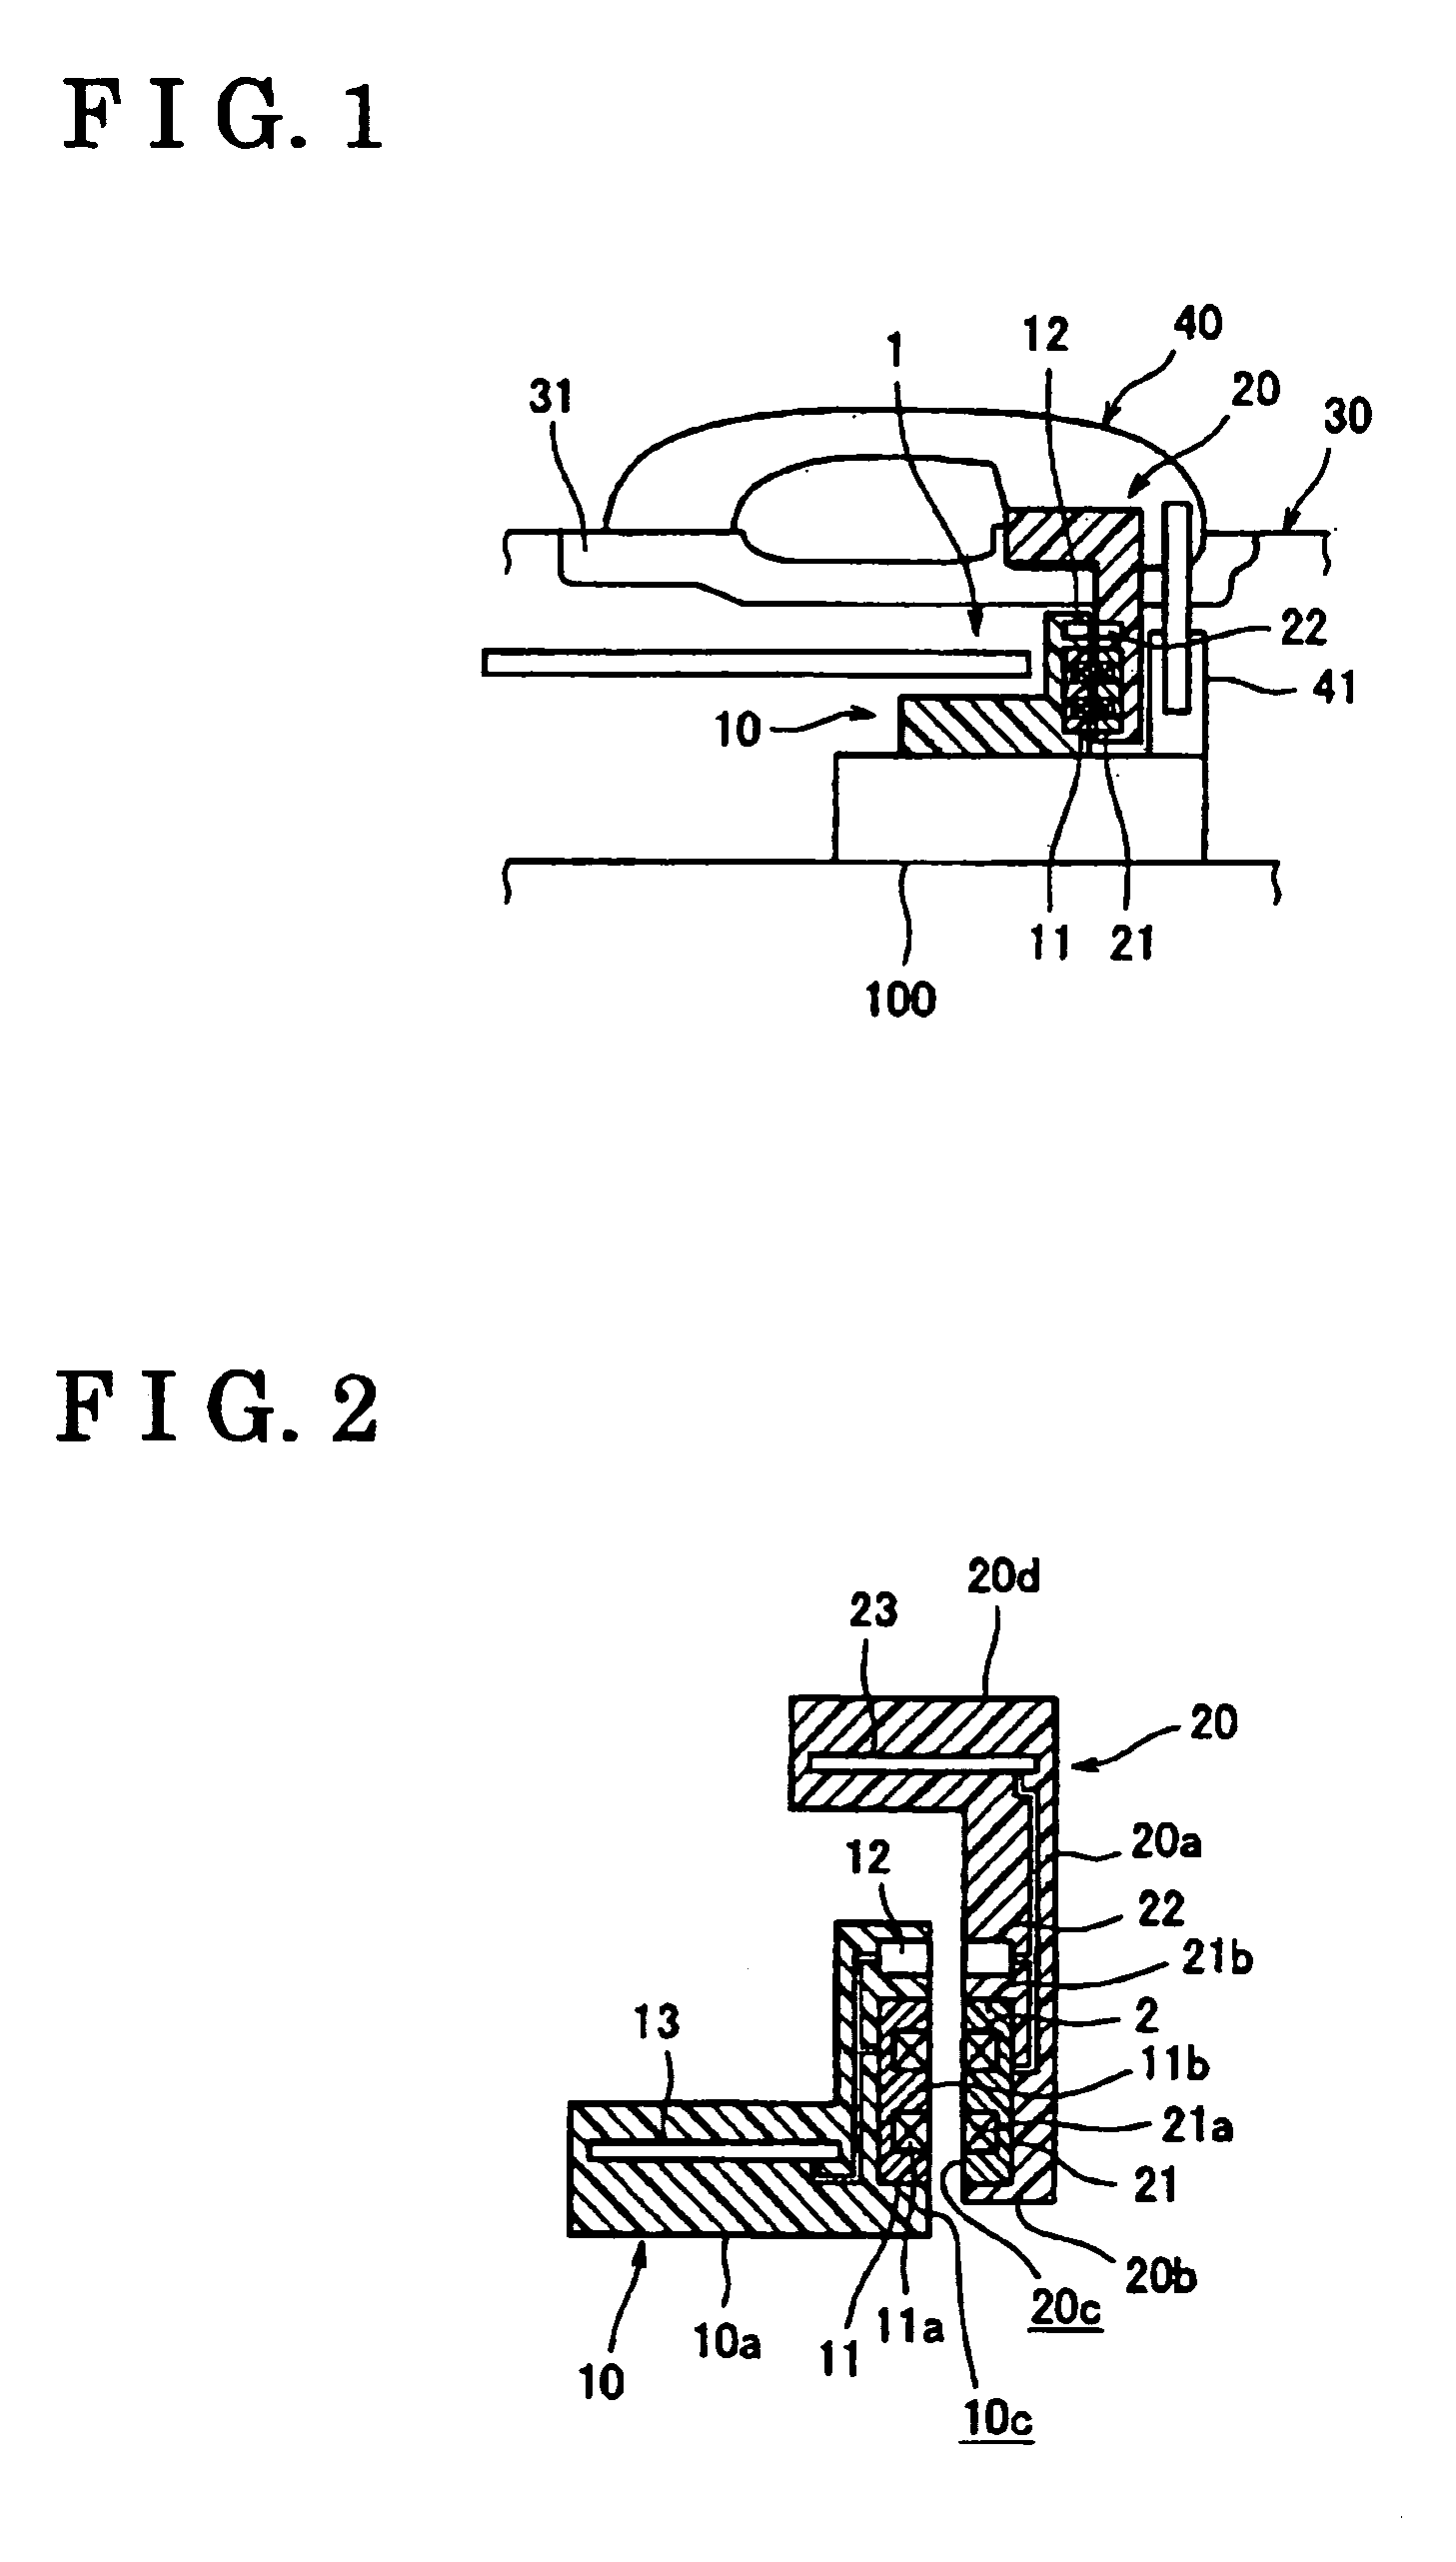 Outside handle device for a vehicle door